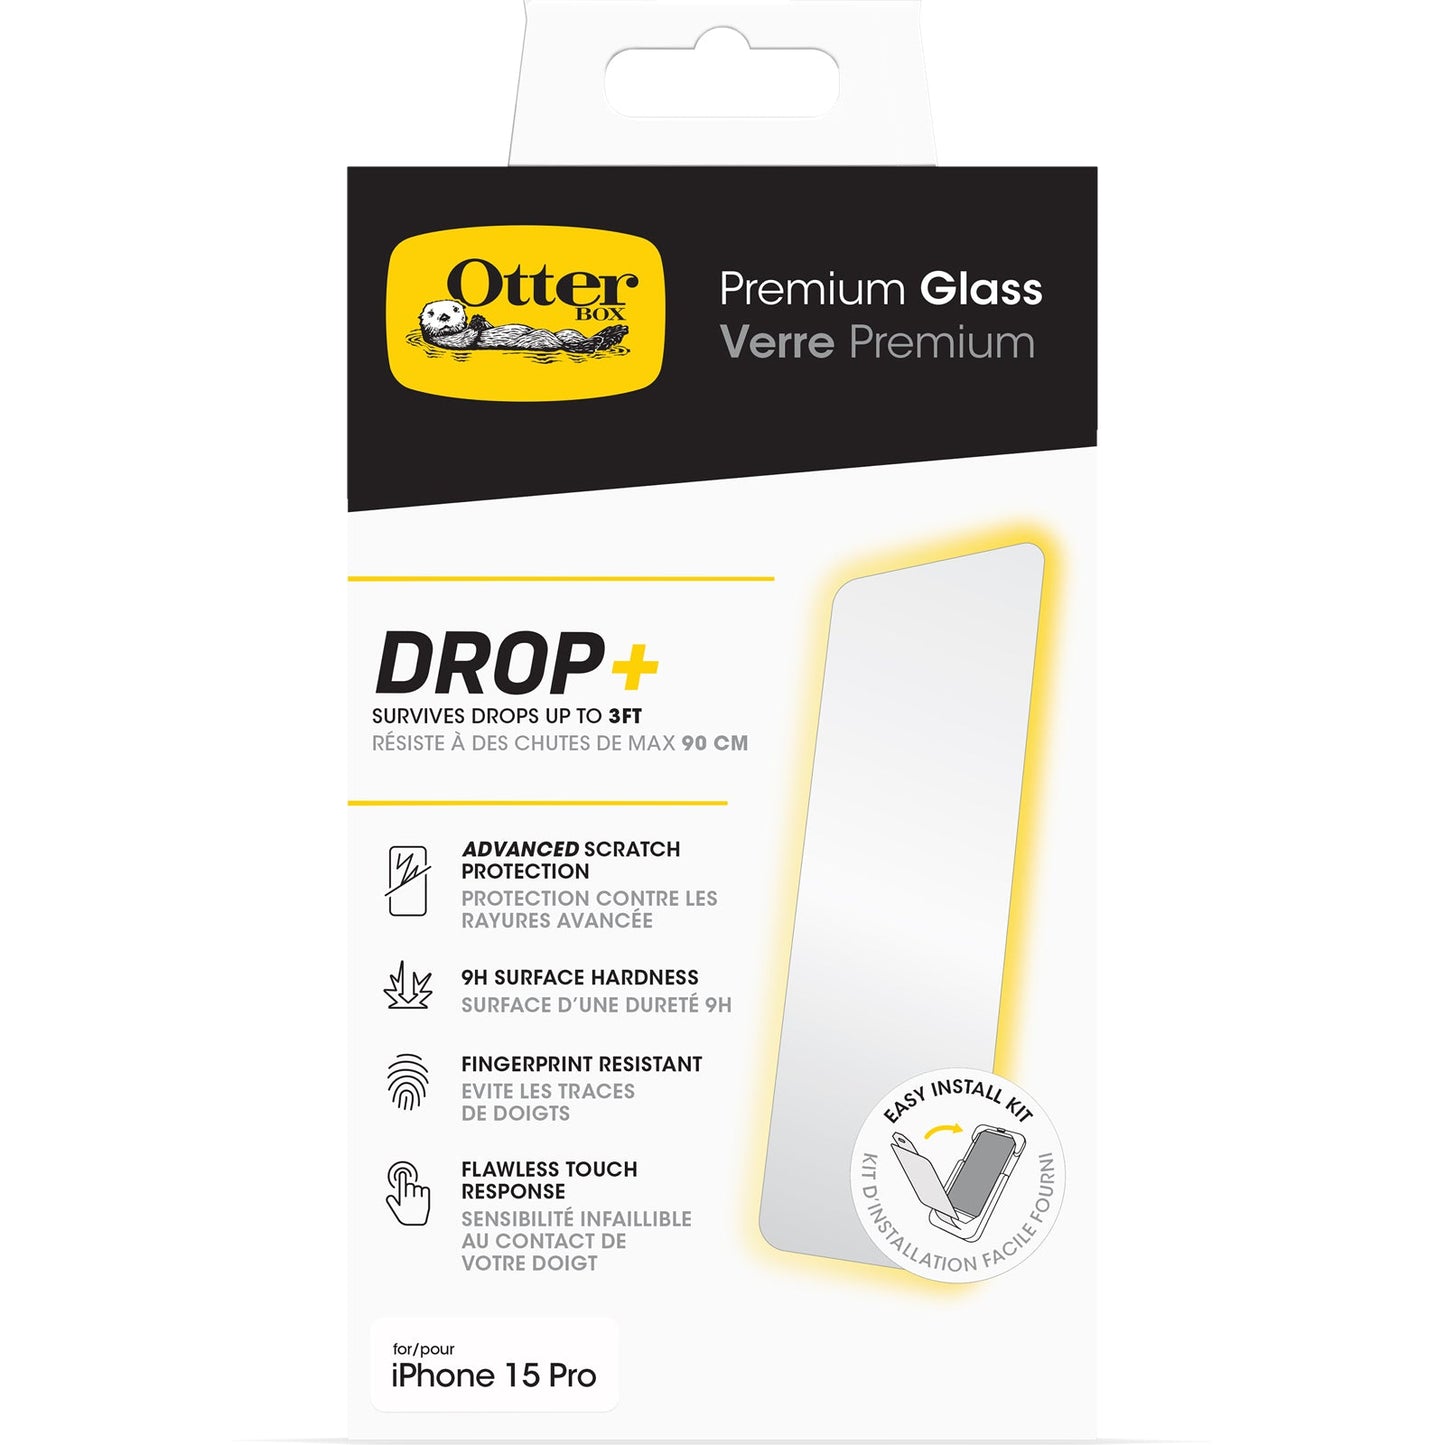 OtterBox iPhone 15 Pro (Only) Premium Glass, antimicrobial, anti-scratch protection, shatter Resistant, crystal clarity